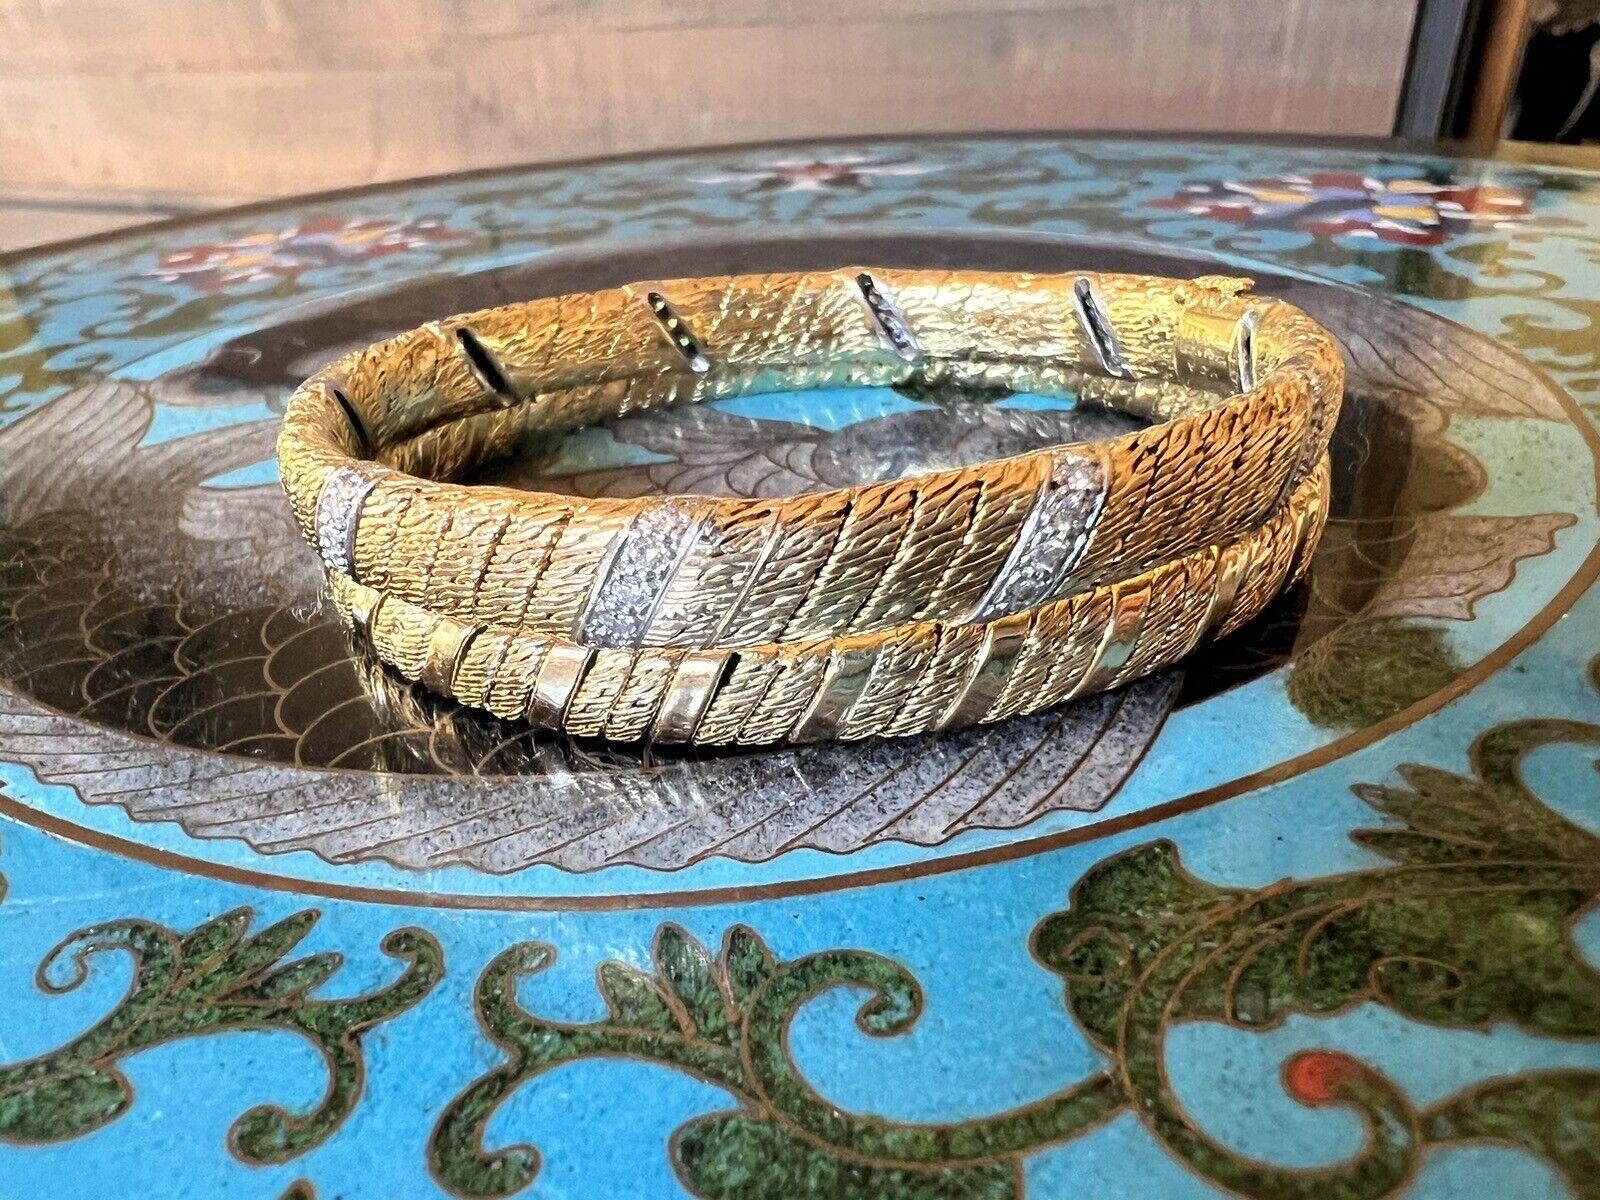 Van Cleef & Arpels Paris by Georges Lenfant 18k Yellow Gold & Diamond Pair of Bangles Vintage Circa 1970s

Here is your chance to purchase a beautiful and highly collectible designer pair of bangle bracelets.  

Made in the 1970s by Georges Lenfant